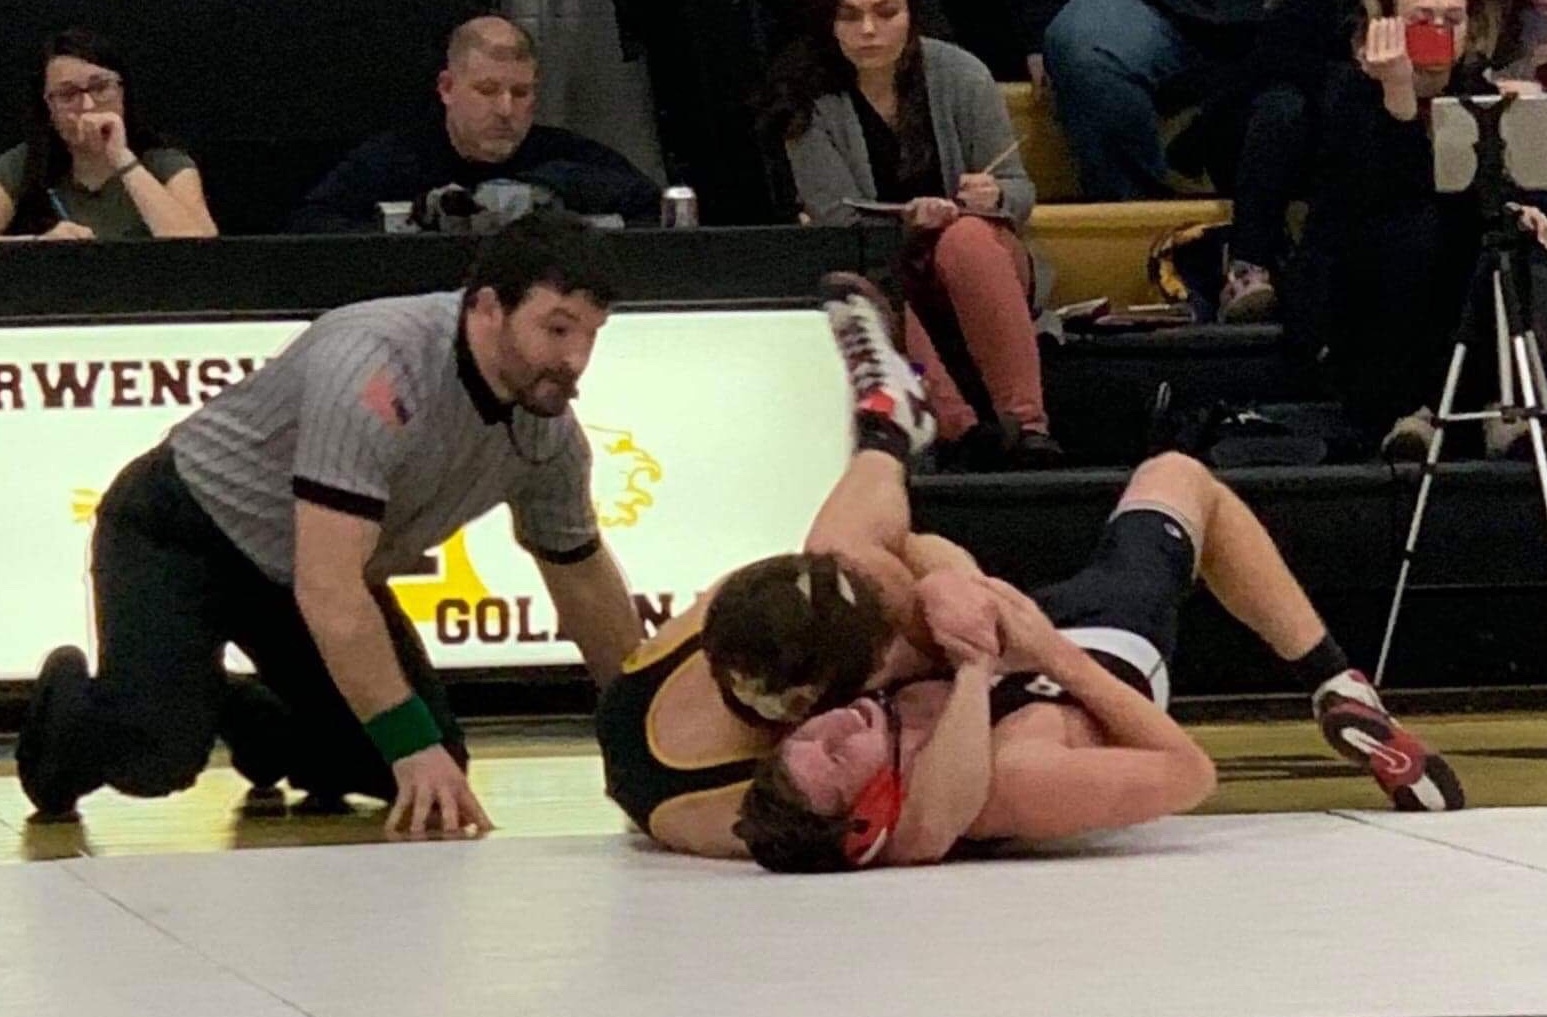 Zach Holland finished his undefeated regular season with a fall